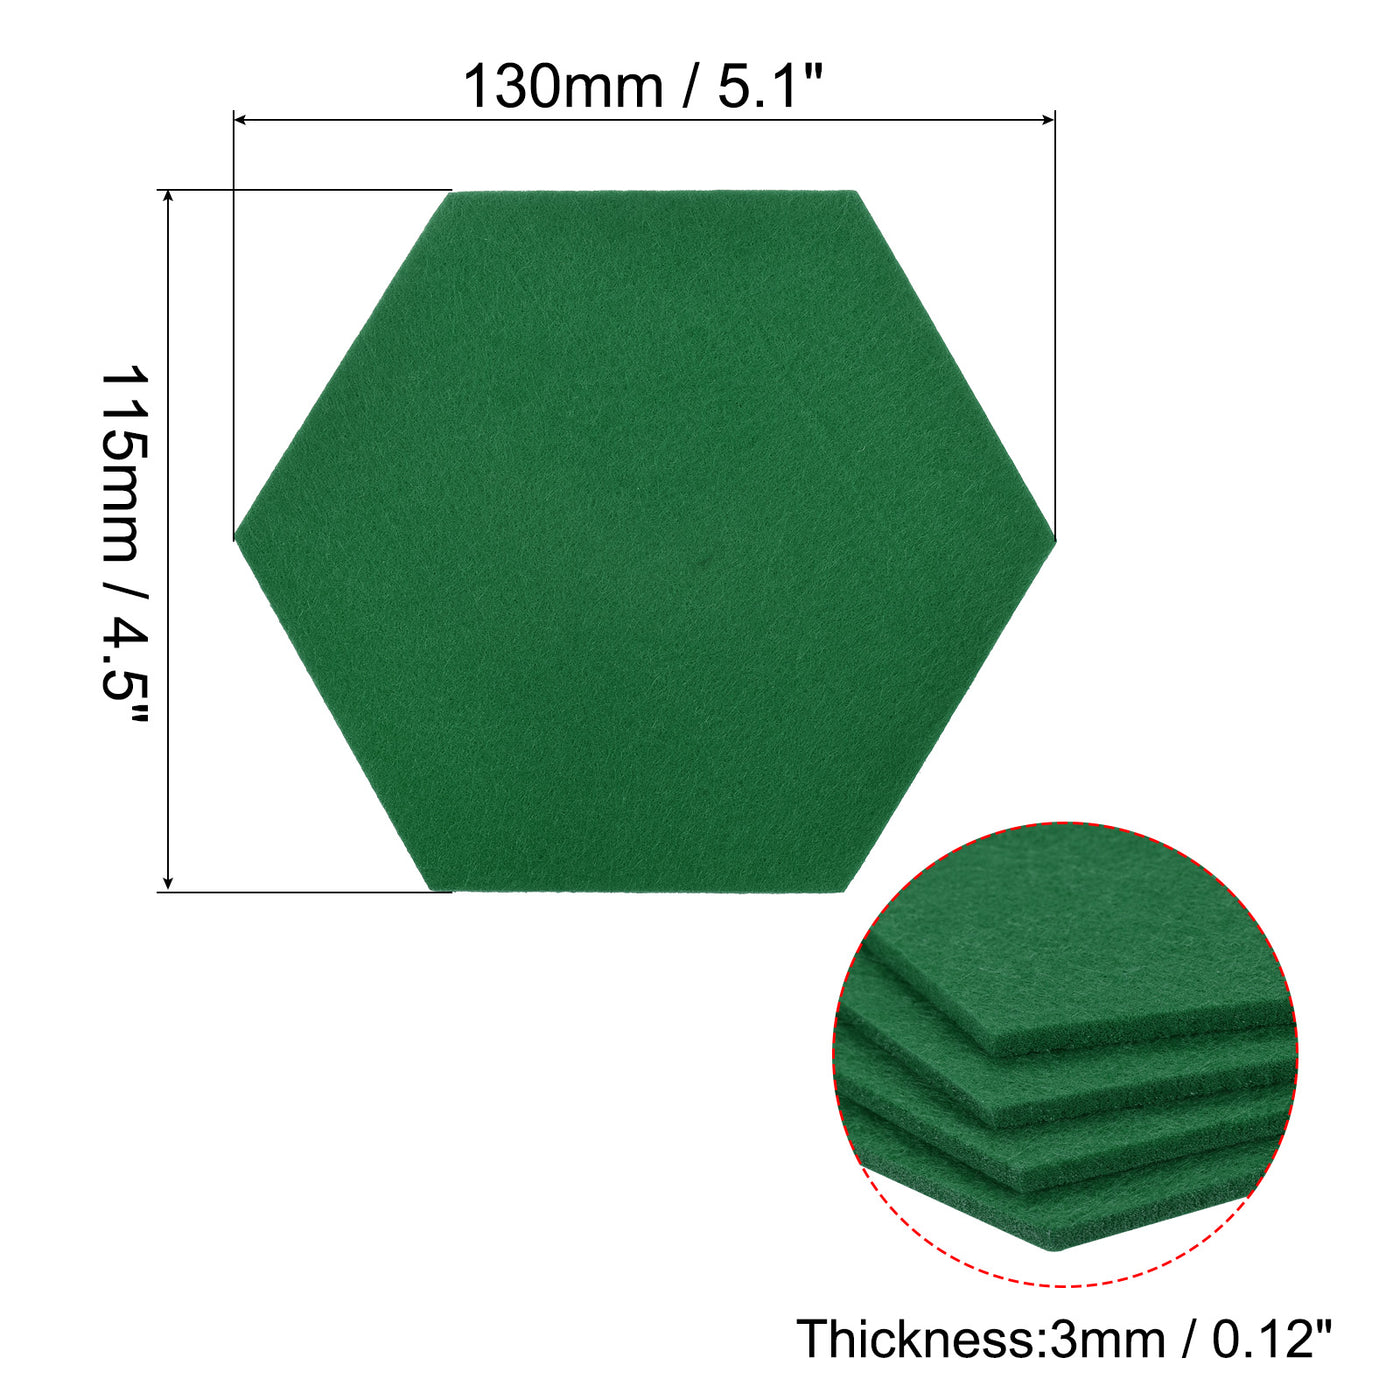 uxcell Uxcell Felt Coasters 4pcs Absorbent Pad Coaster for Drink Cup Pot Bowl Vase Green